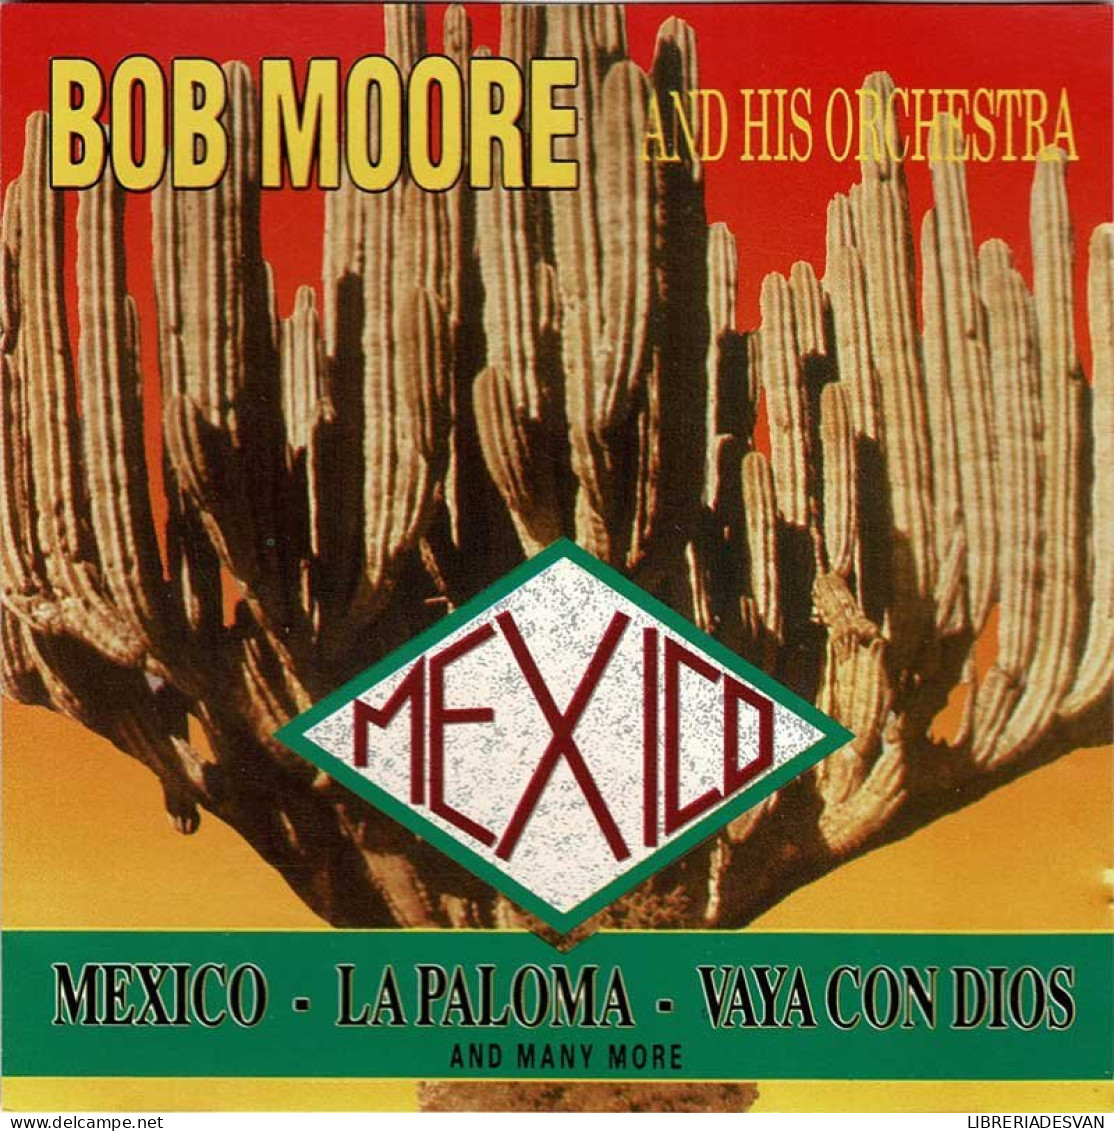 Bob Moore And His Orchestra - Mexico. CD - Country Et Folk